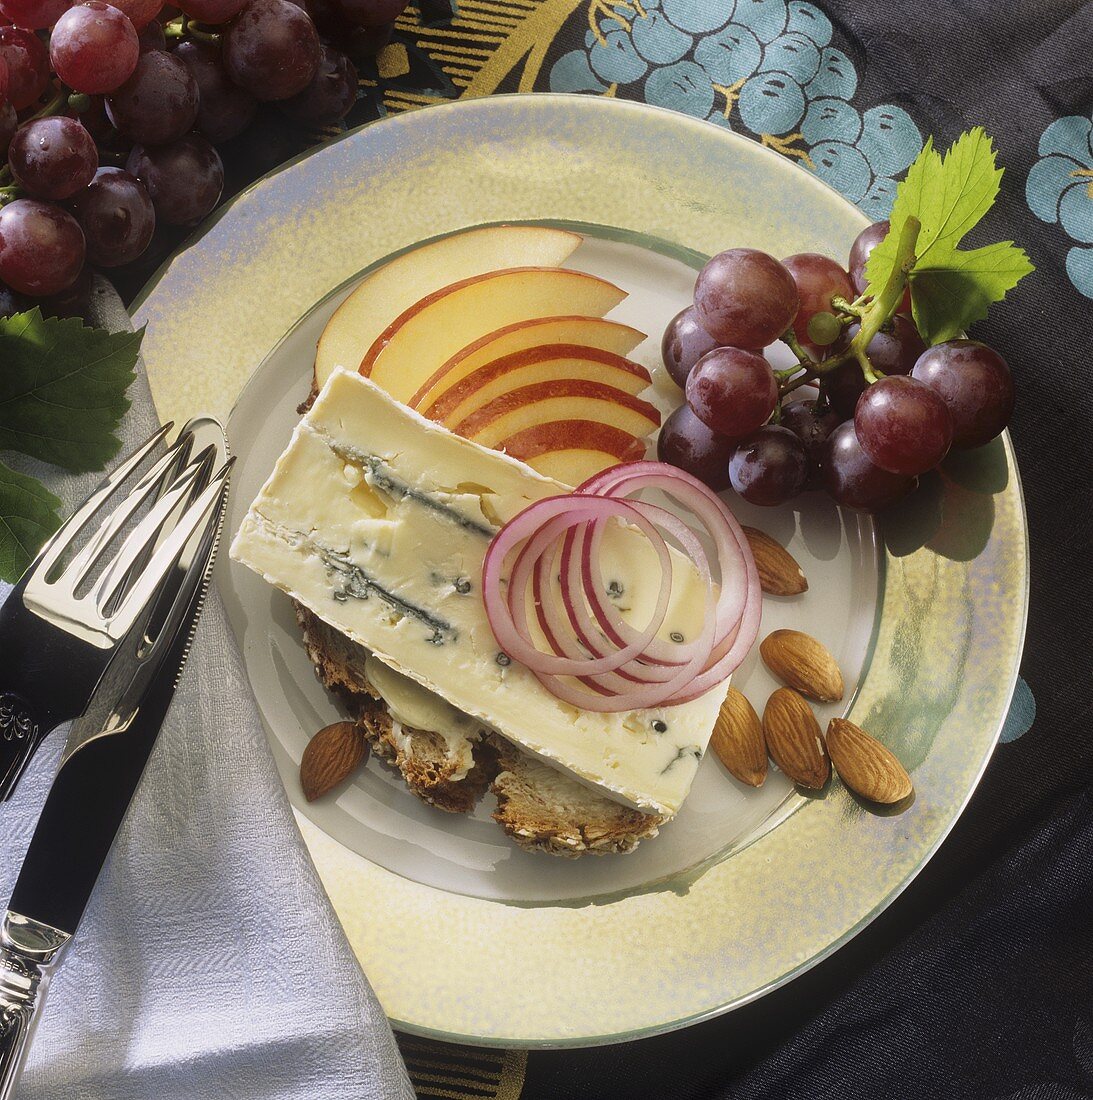 Bread and cheese with grapes and almonds